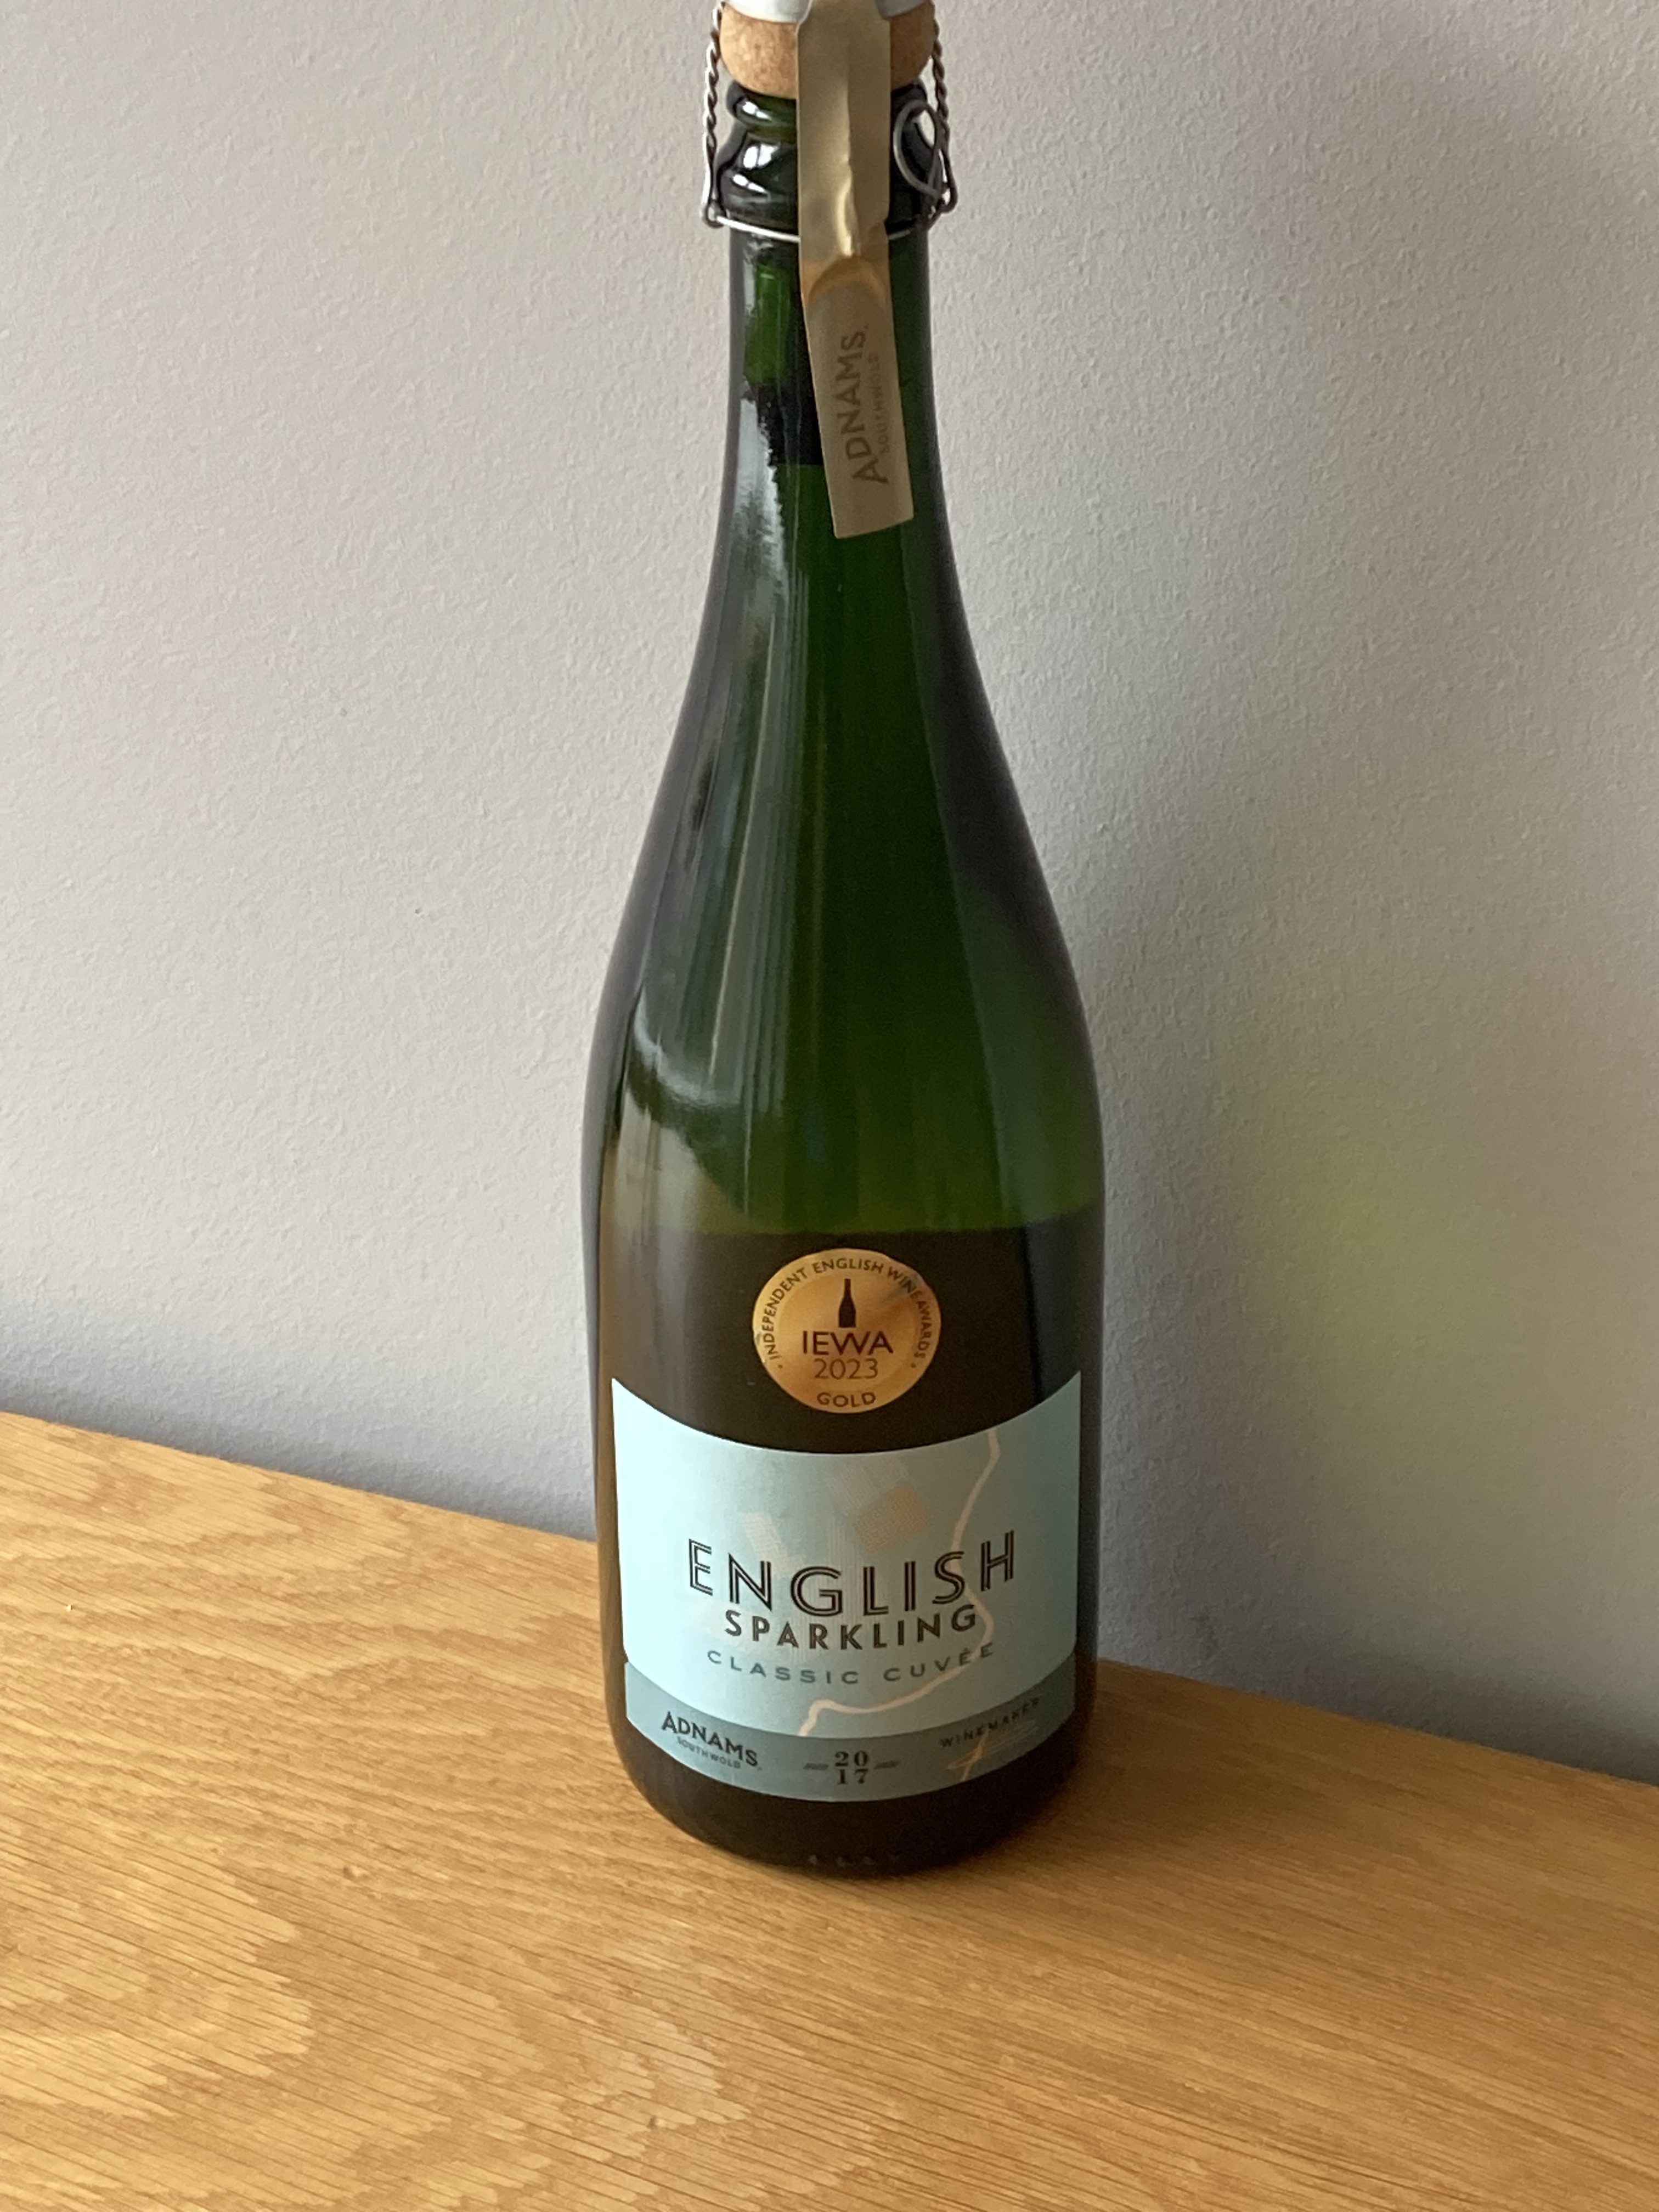 If you're looking for vintage bubbly, this is the one to go for.